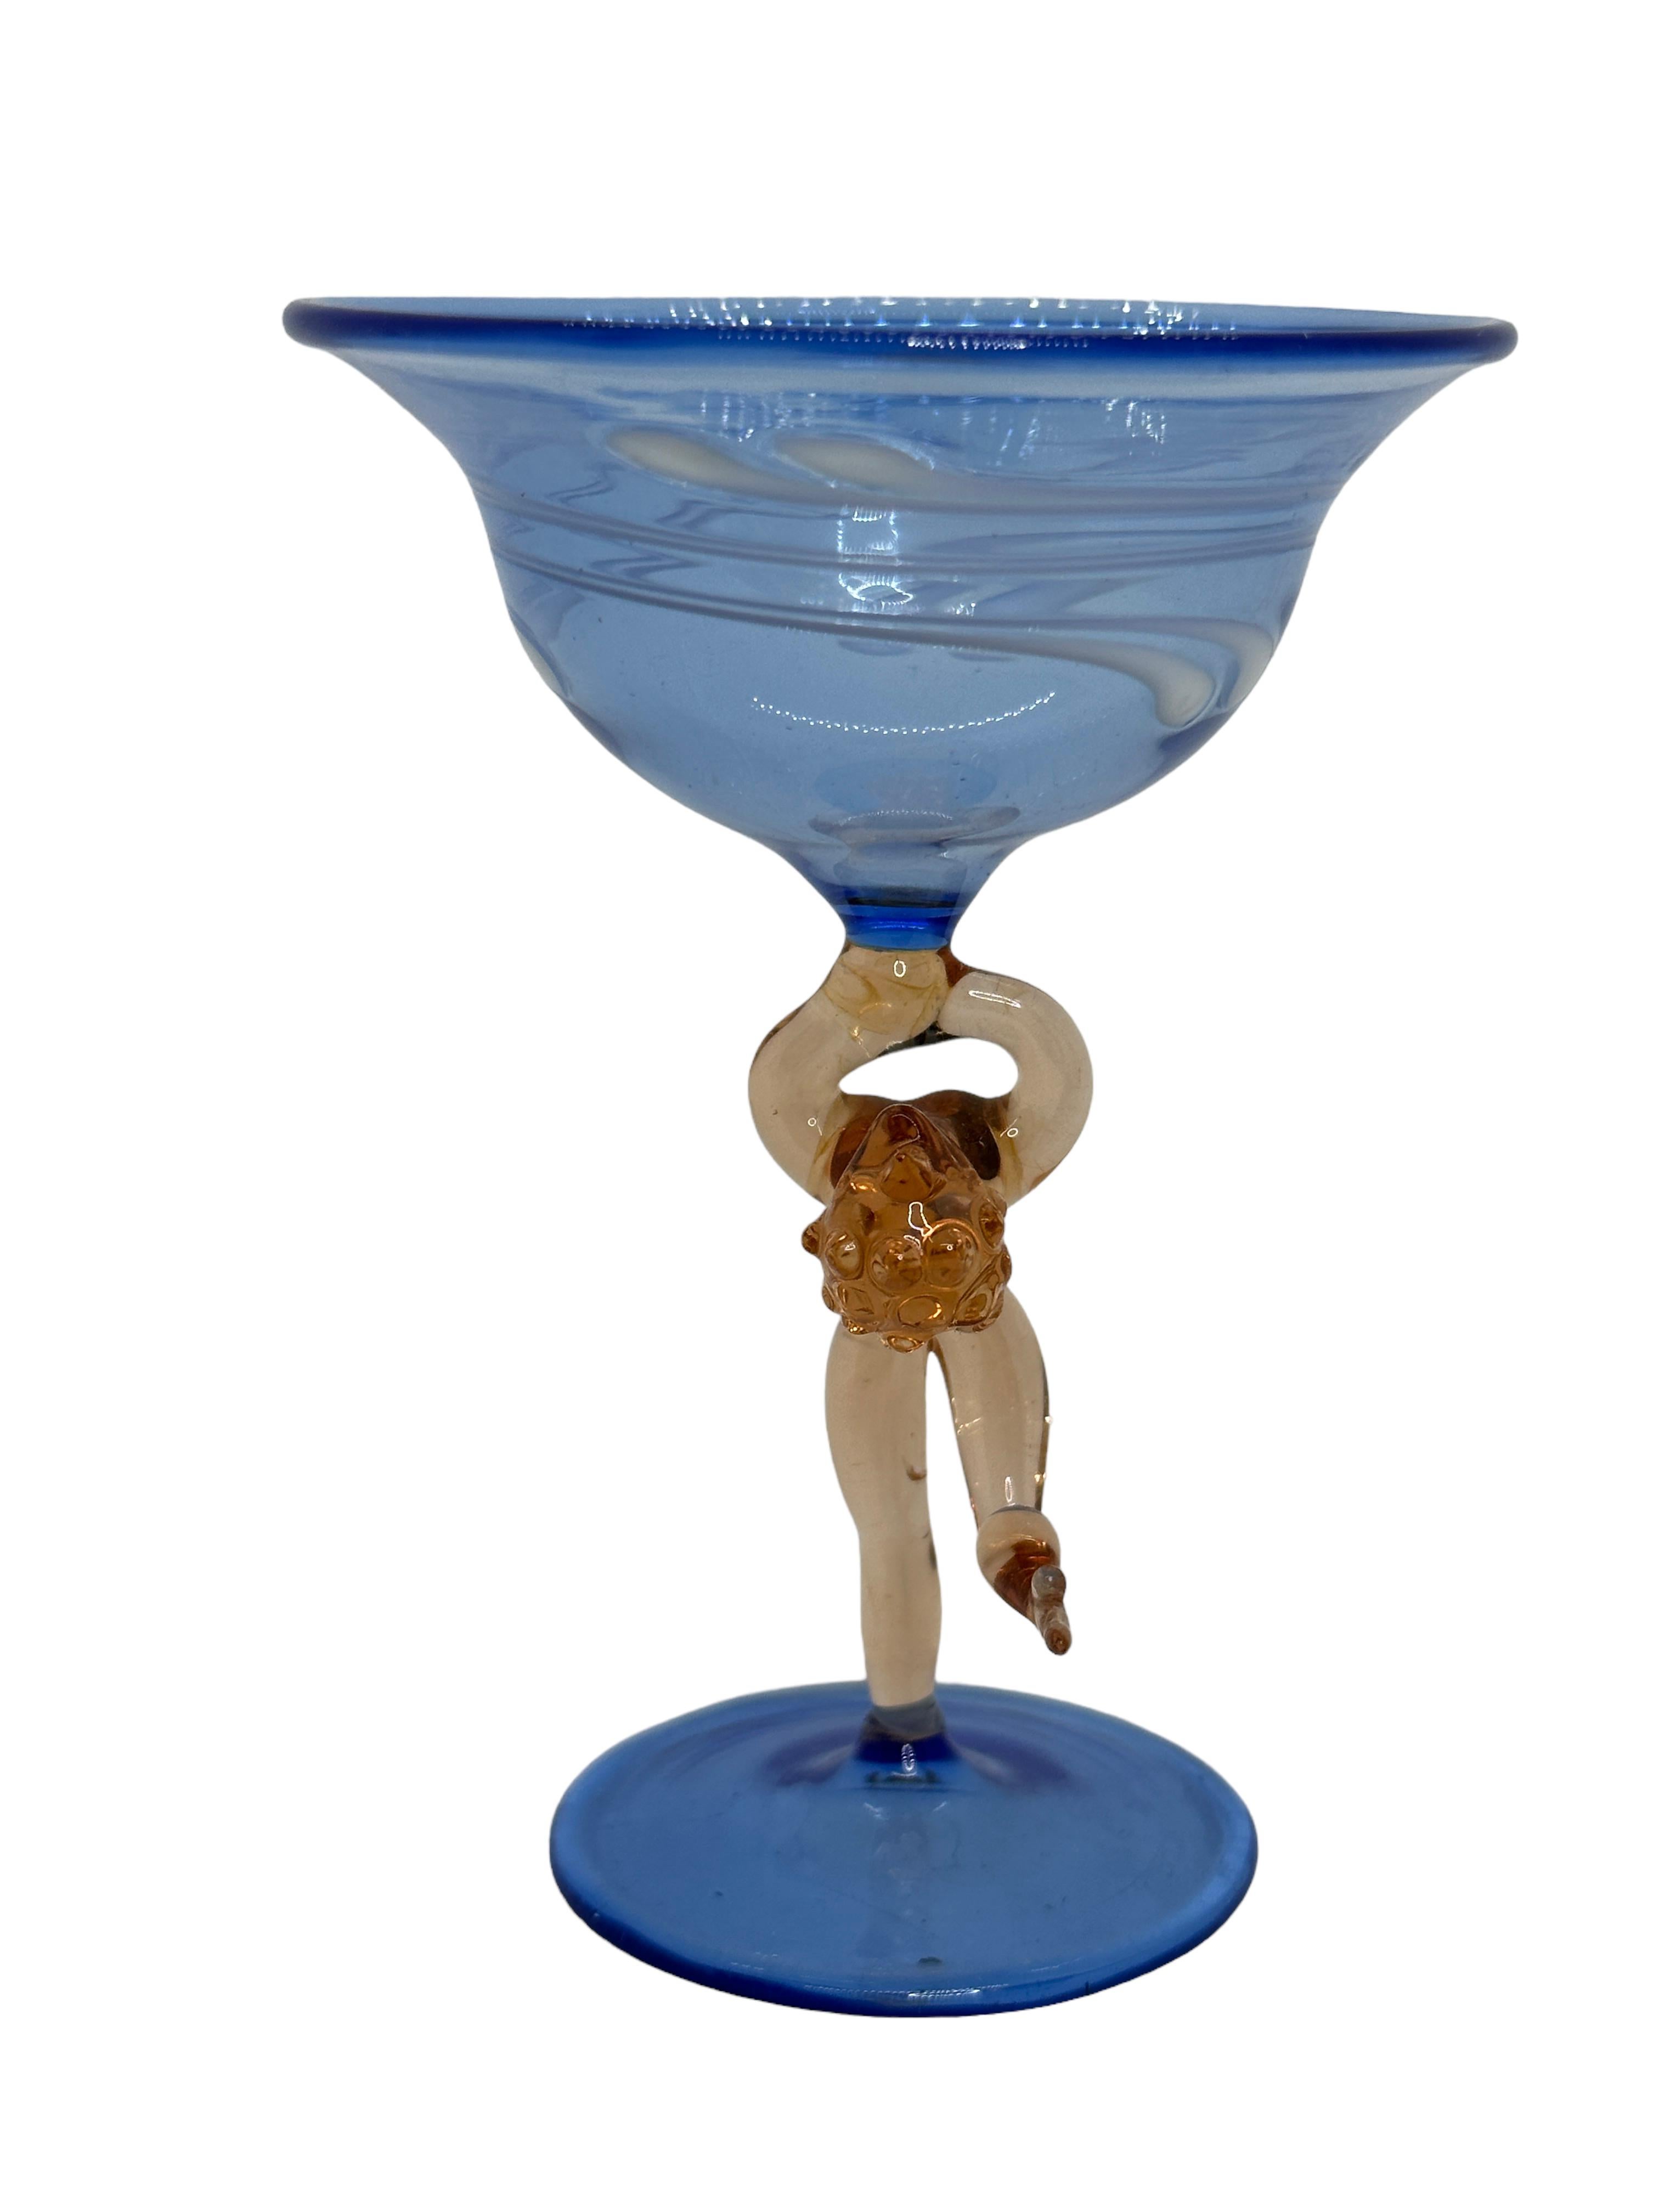 This is a beautiful single vintage stemmed cocktail glass from Austria. It features a bare women's shaft and is in Bimini art style. The blue glass has an embossed design, the stem is a naked lady in pinkish color. The base is a beautiful blue